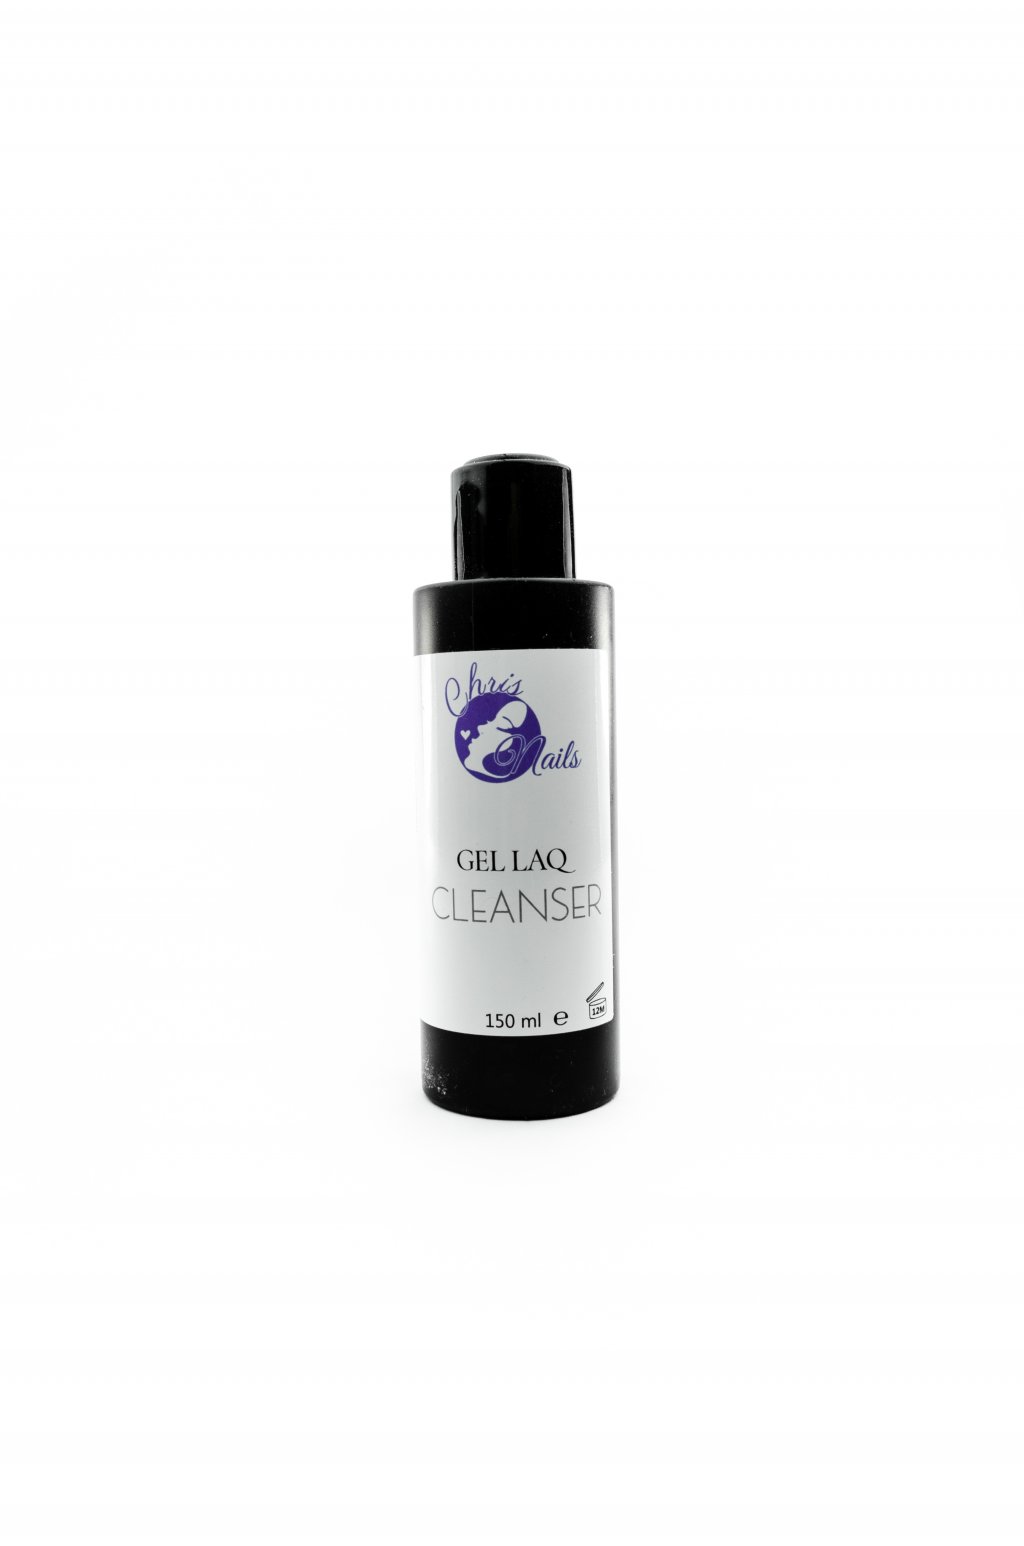 Cleanser € 8.90